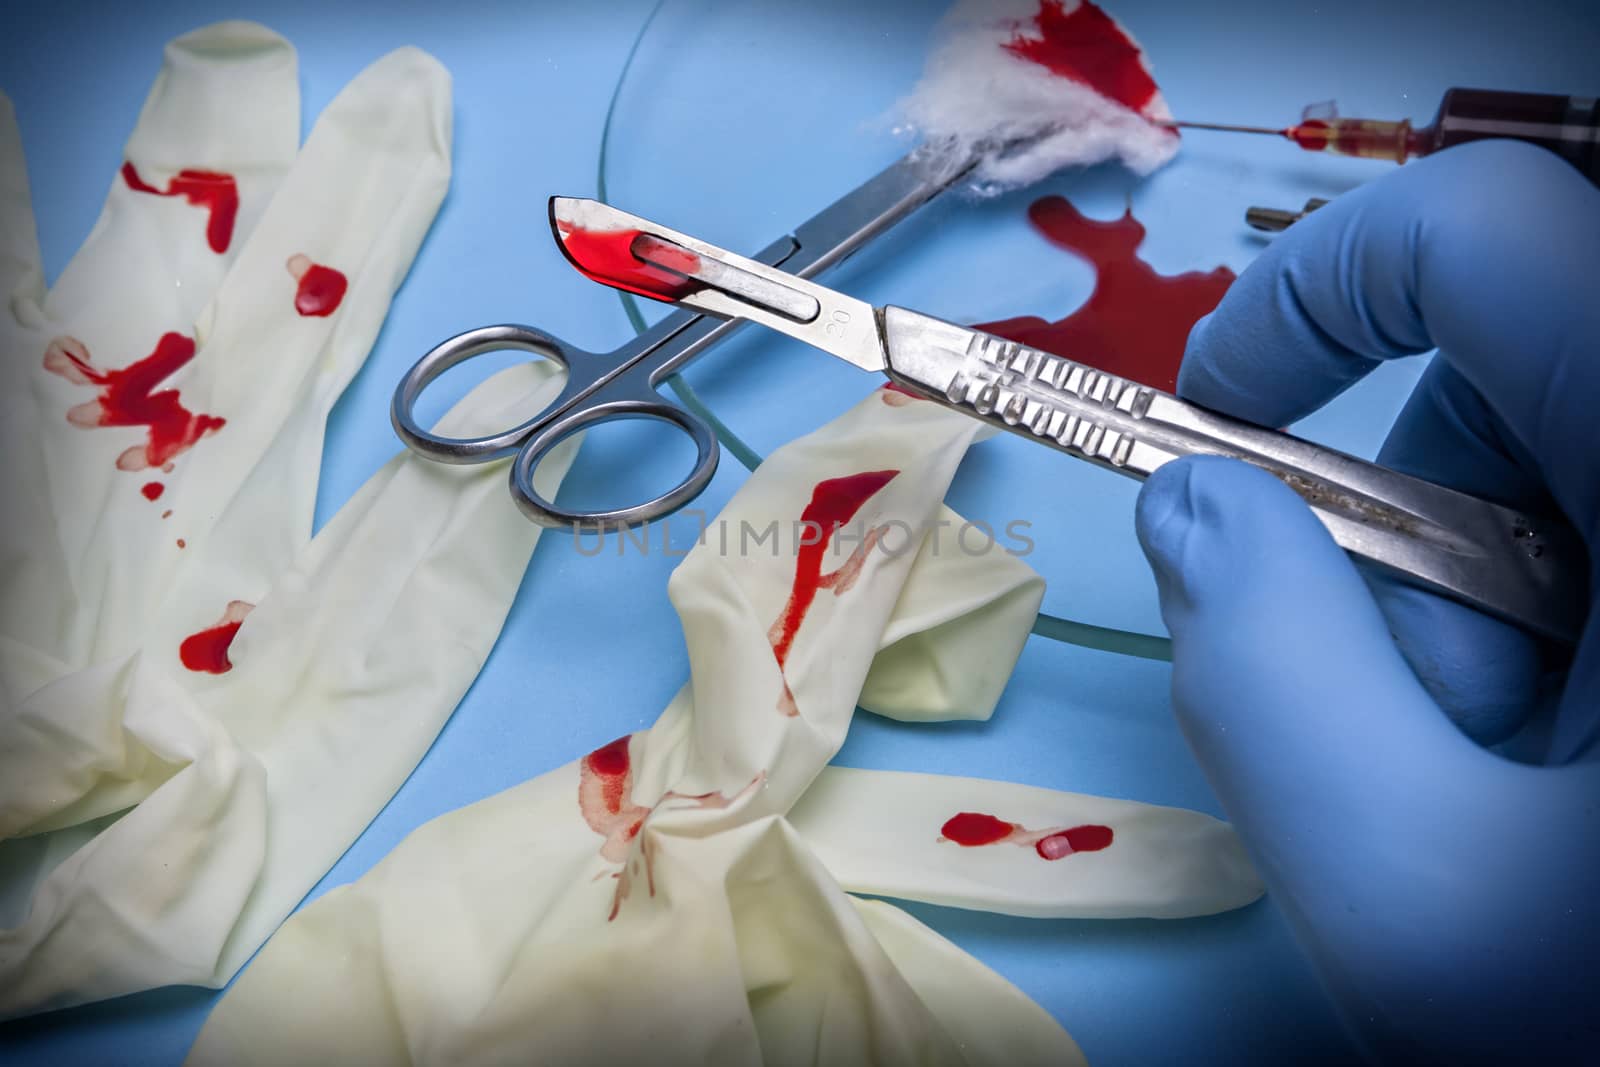 Surgical background, instruments during a surgical procedure